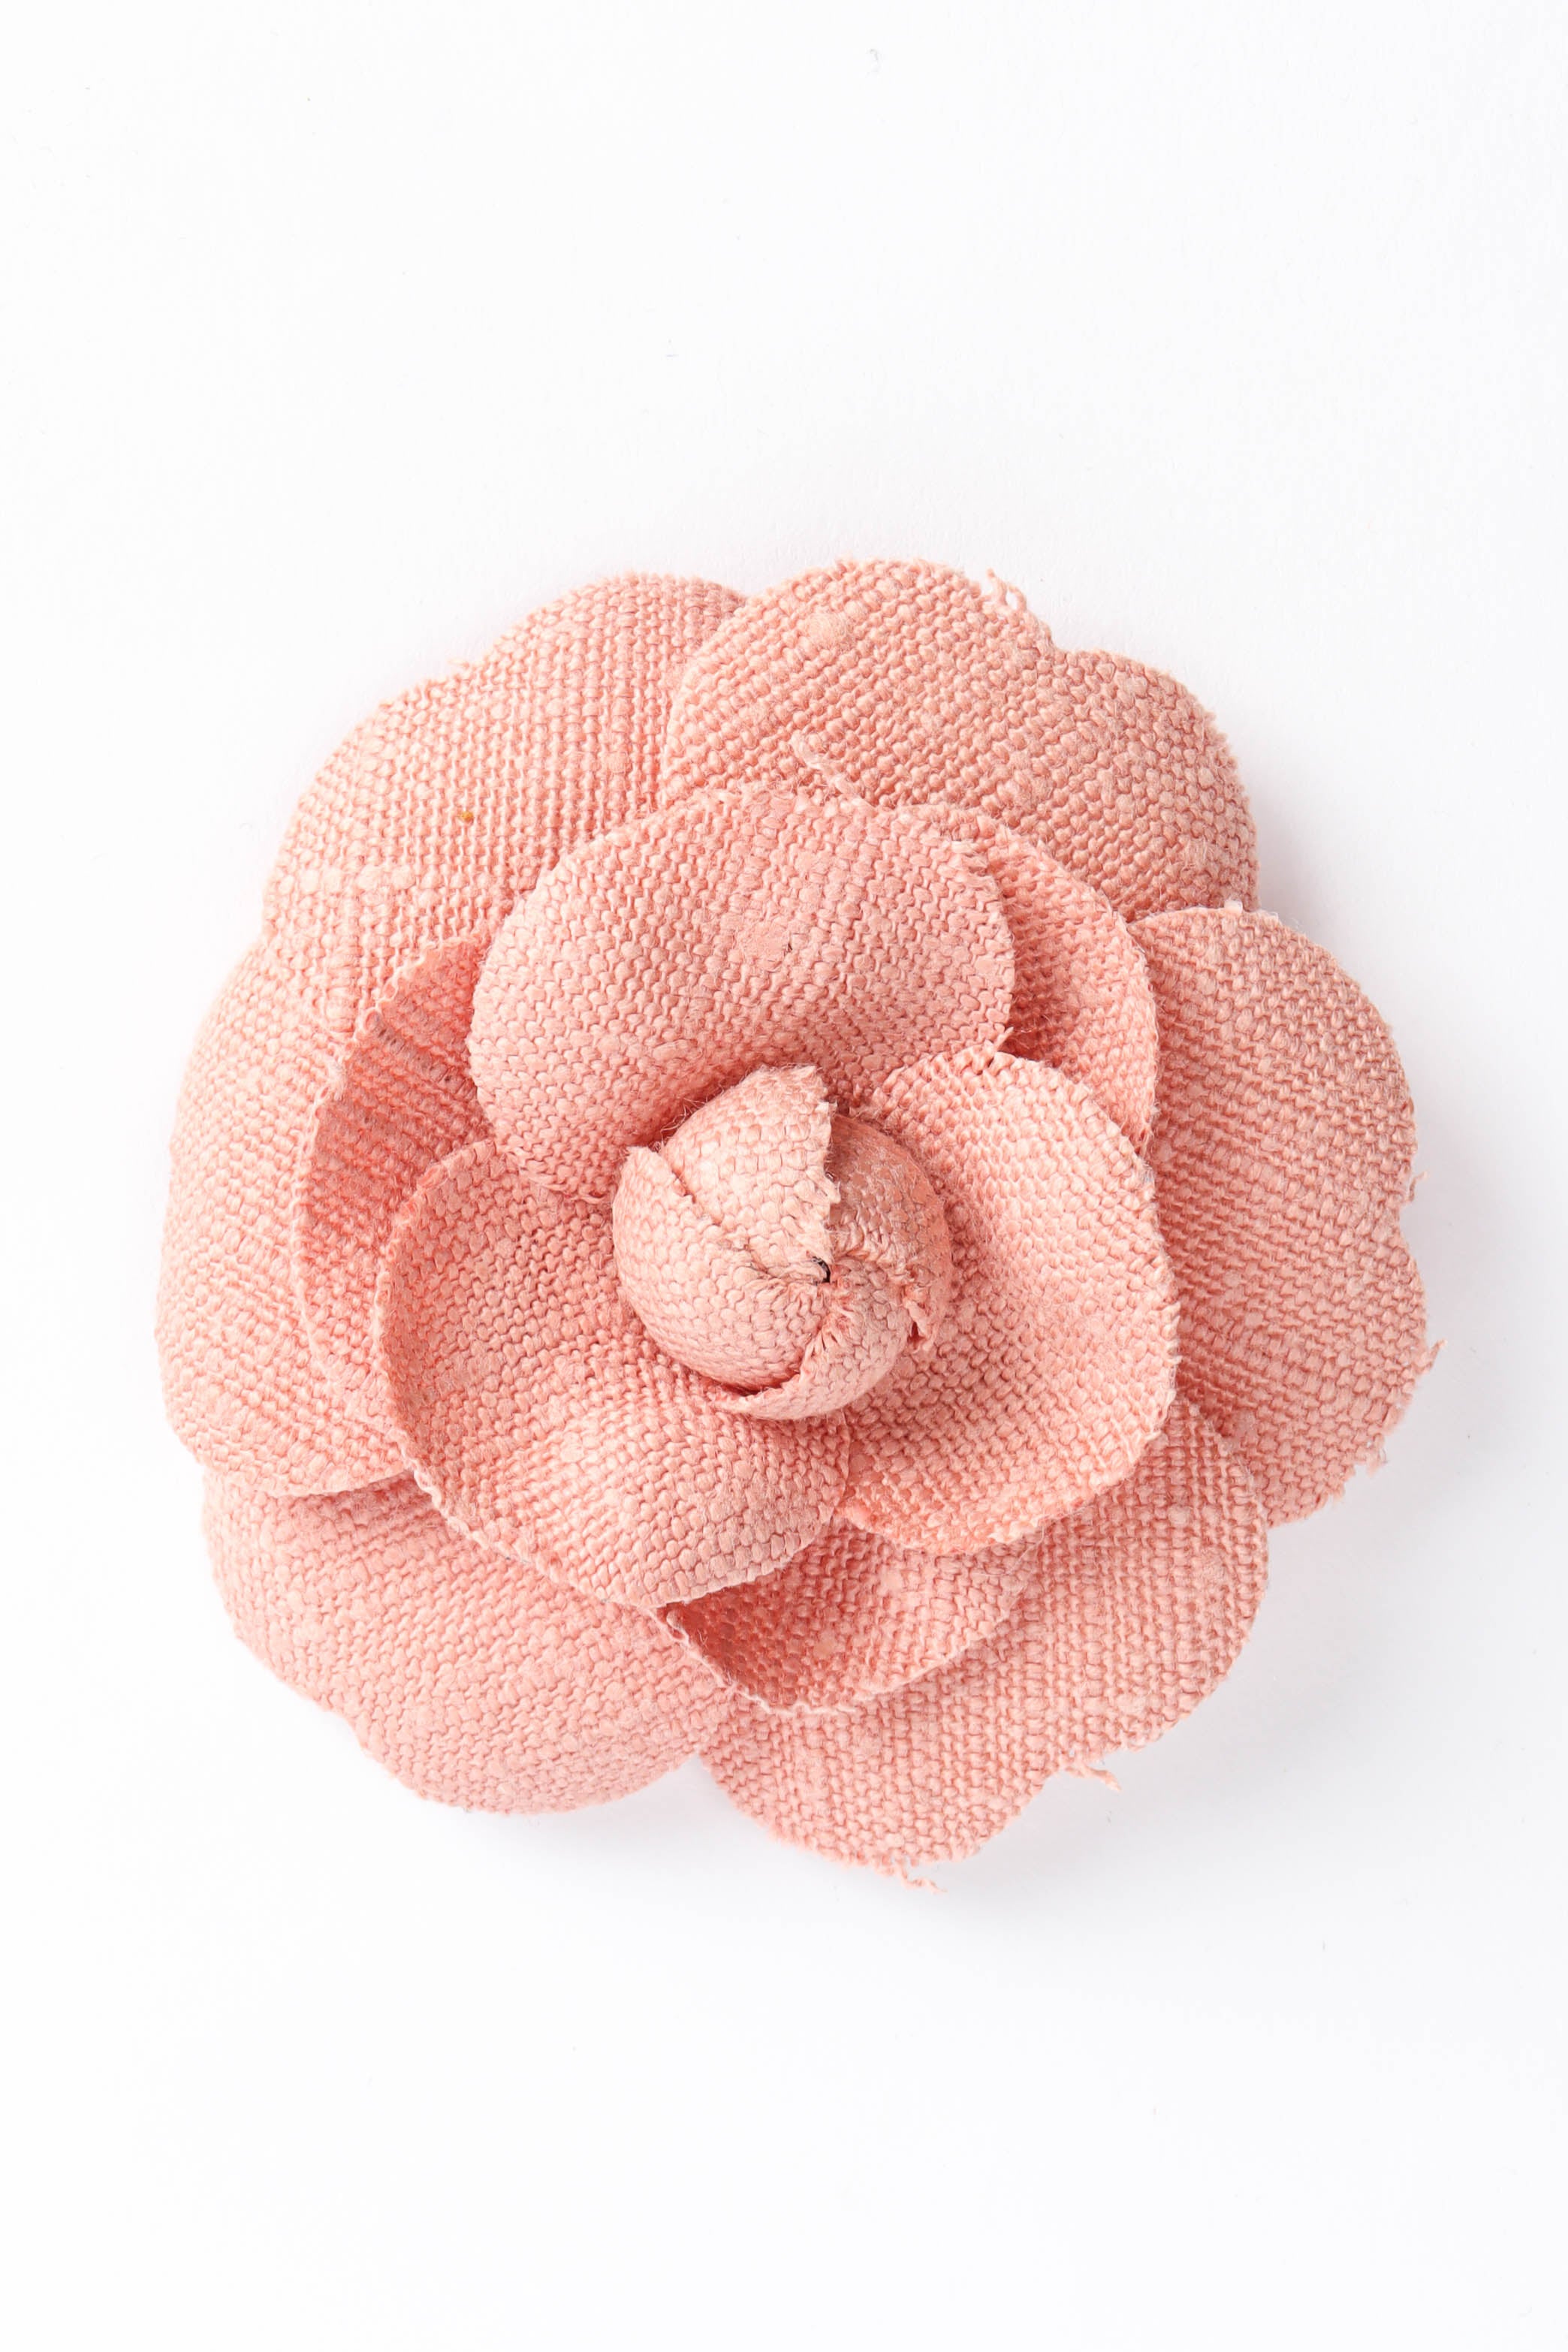 Authentic CHANEL Beige Fabric Camellia Brooch Pin #53376